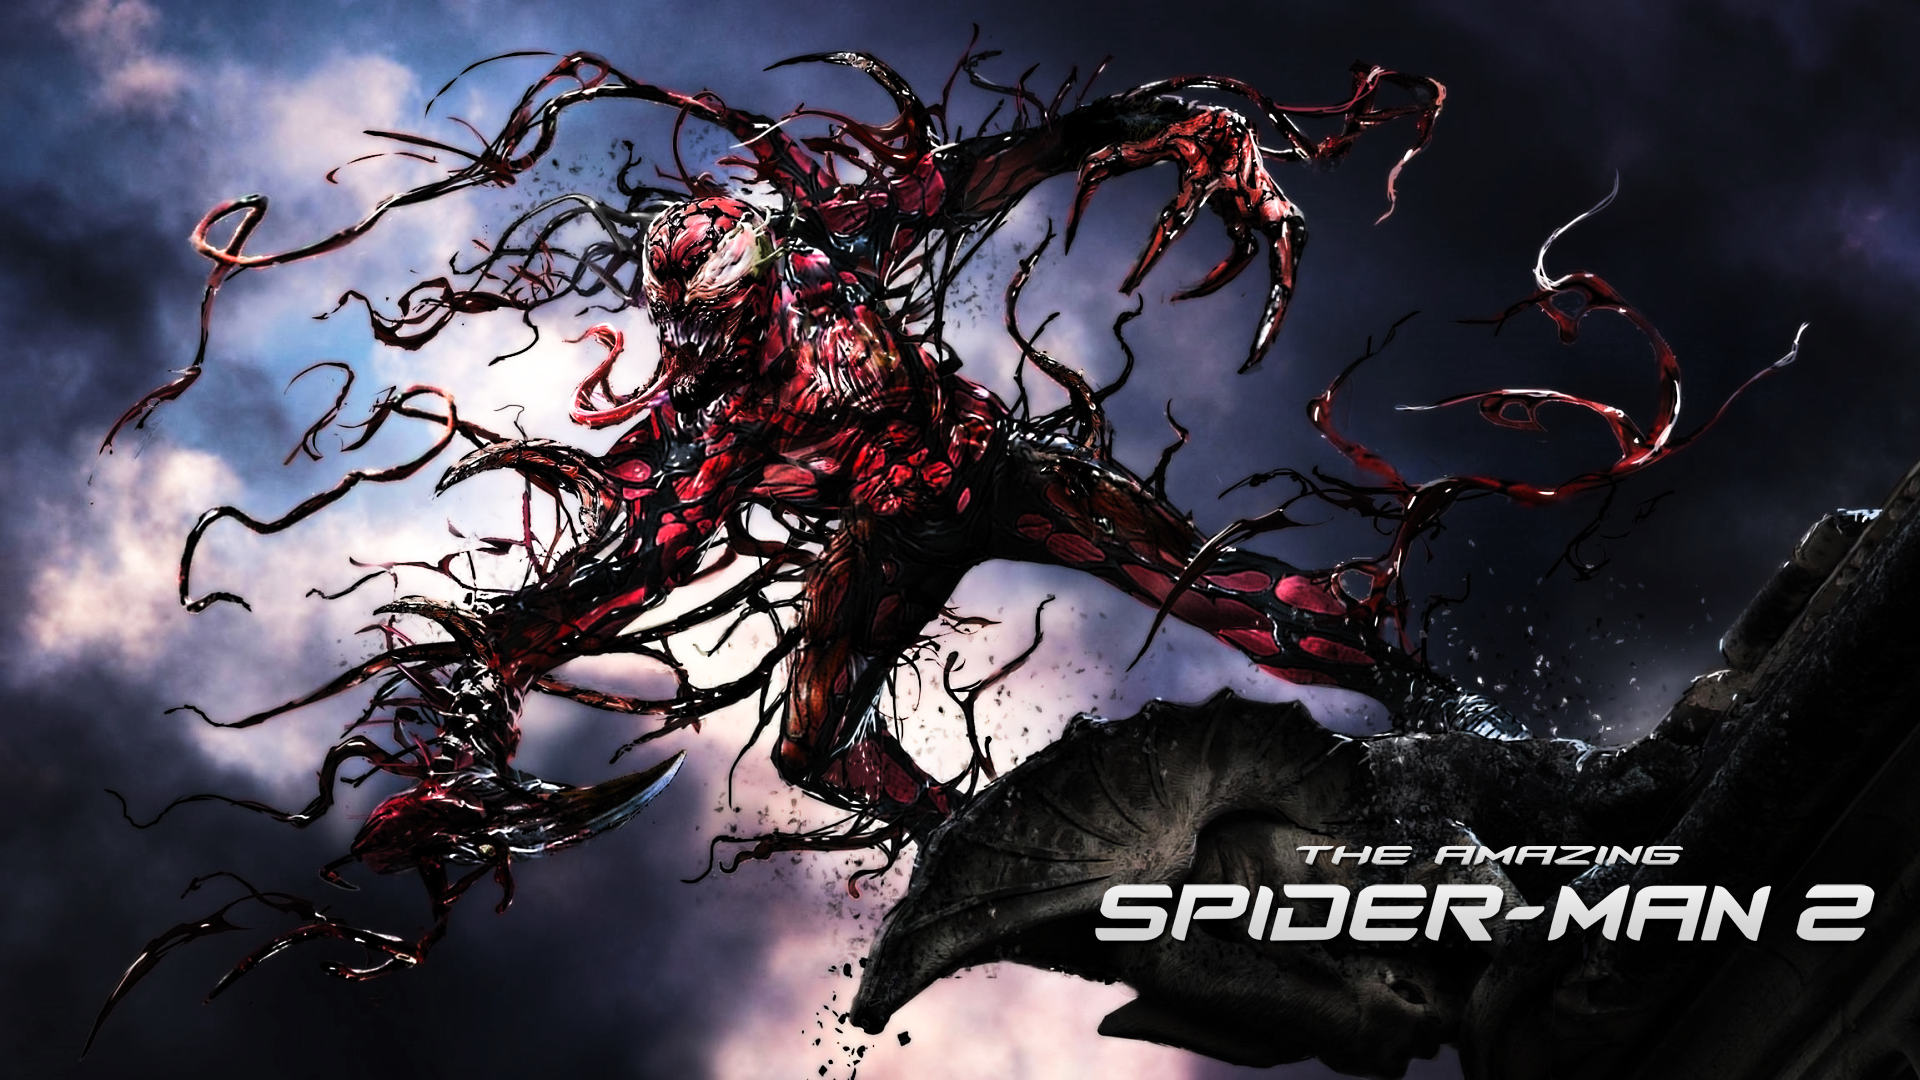 Spider-Man 4 Lizard And Carnage - wallpaper.